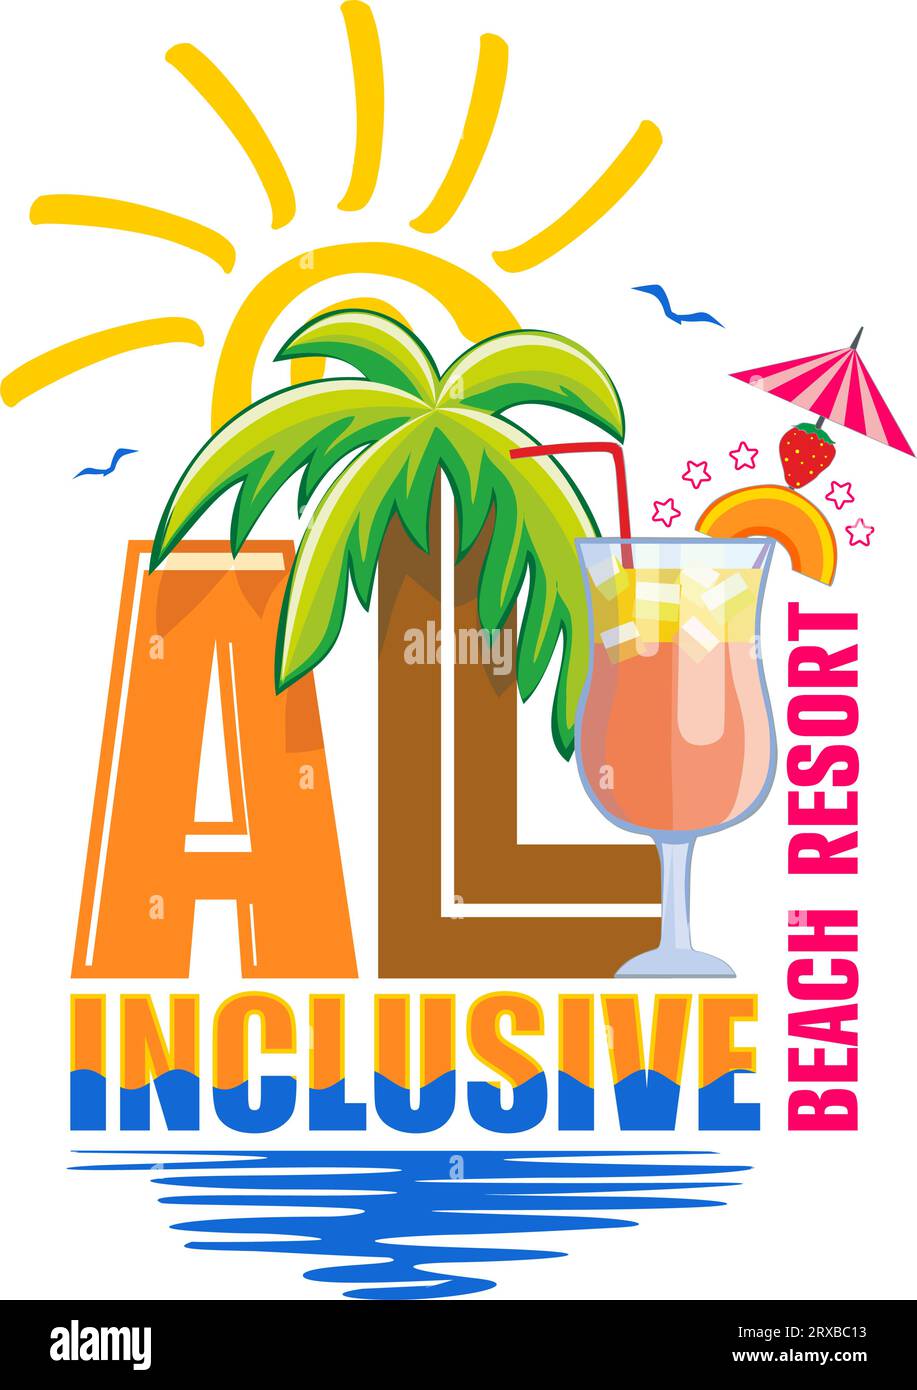 All inclusive beach resort. Invitation template with sea, sun, palm tree, cocktail. Summer holiday vector advertisement Stock Vector